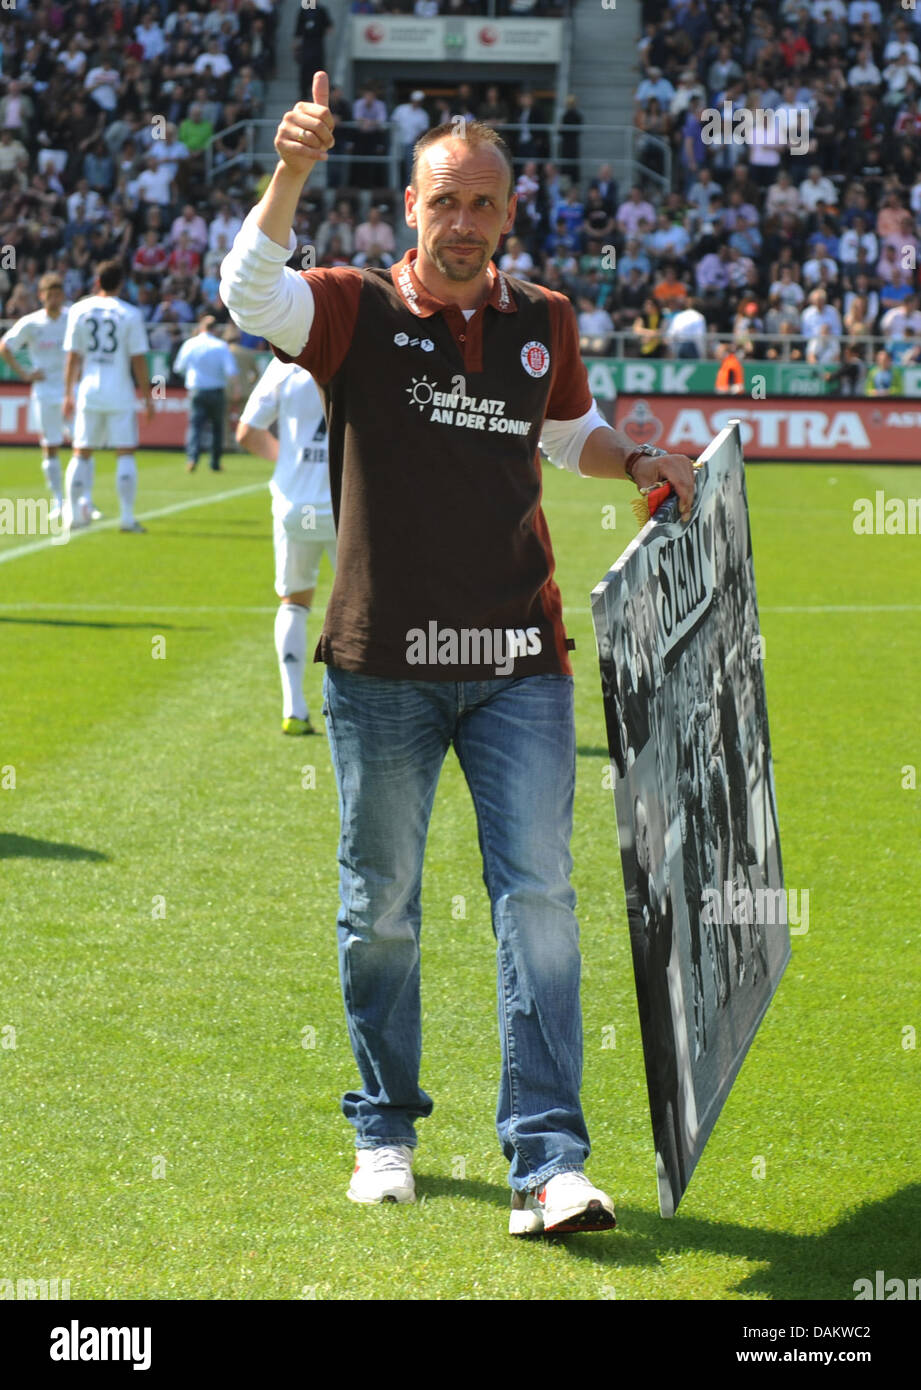 St Pauli's Trainer Holger Stanislawski waves to the fans prior to the German Bundesliga match FC St Pauli vs FC Bayern Munich at Millerntor stadium in Hamburg, germany, 7 May 2011. Stanislawski leaves the sport's club at the end of the season. Photo: Marcus Brandt Stock Photo